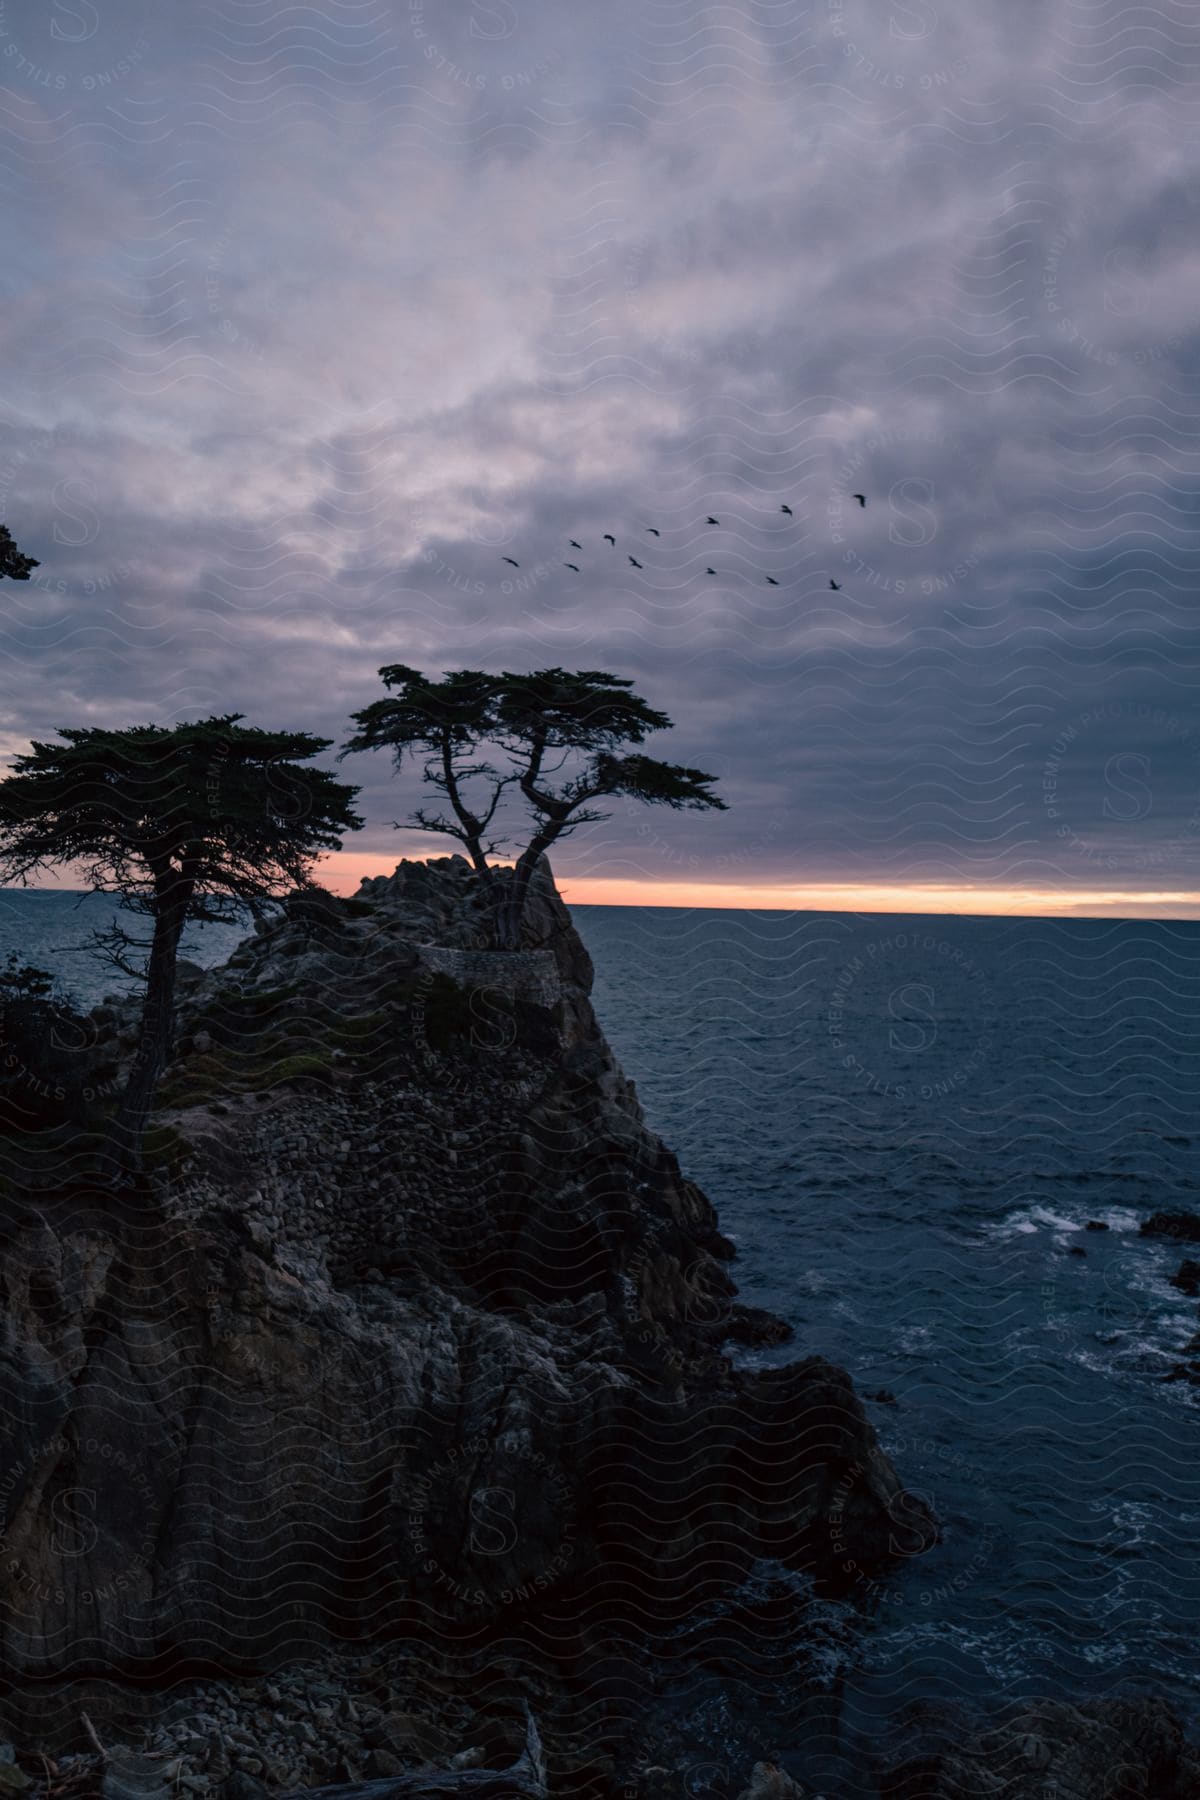 A cliff on the coast with trees